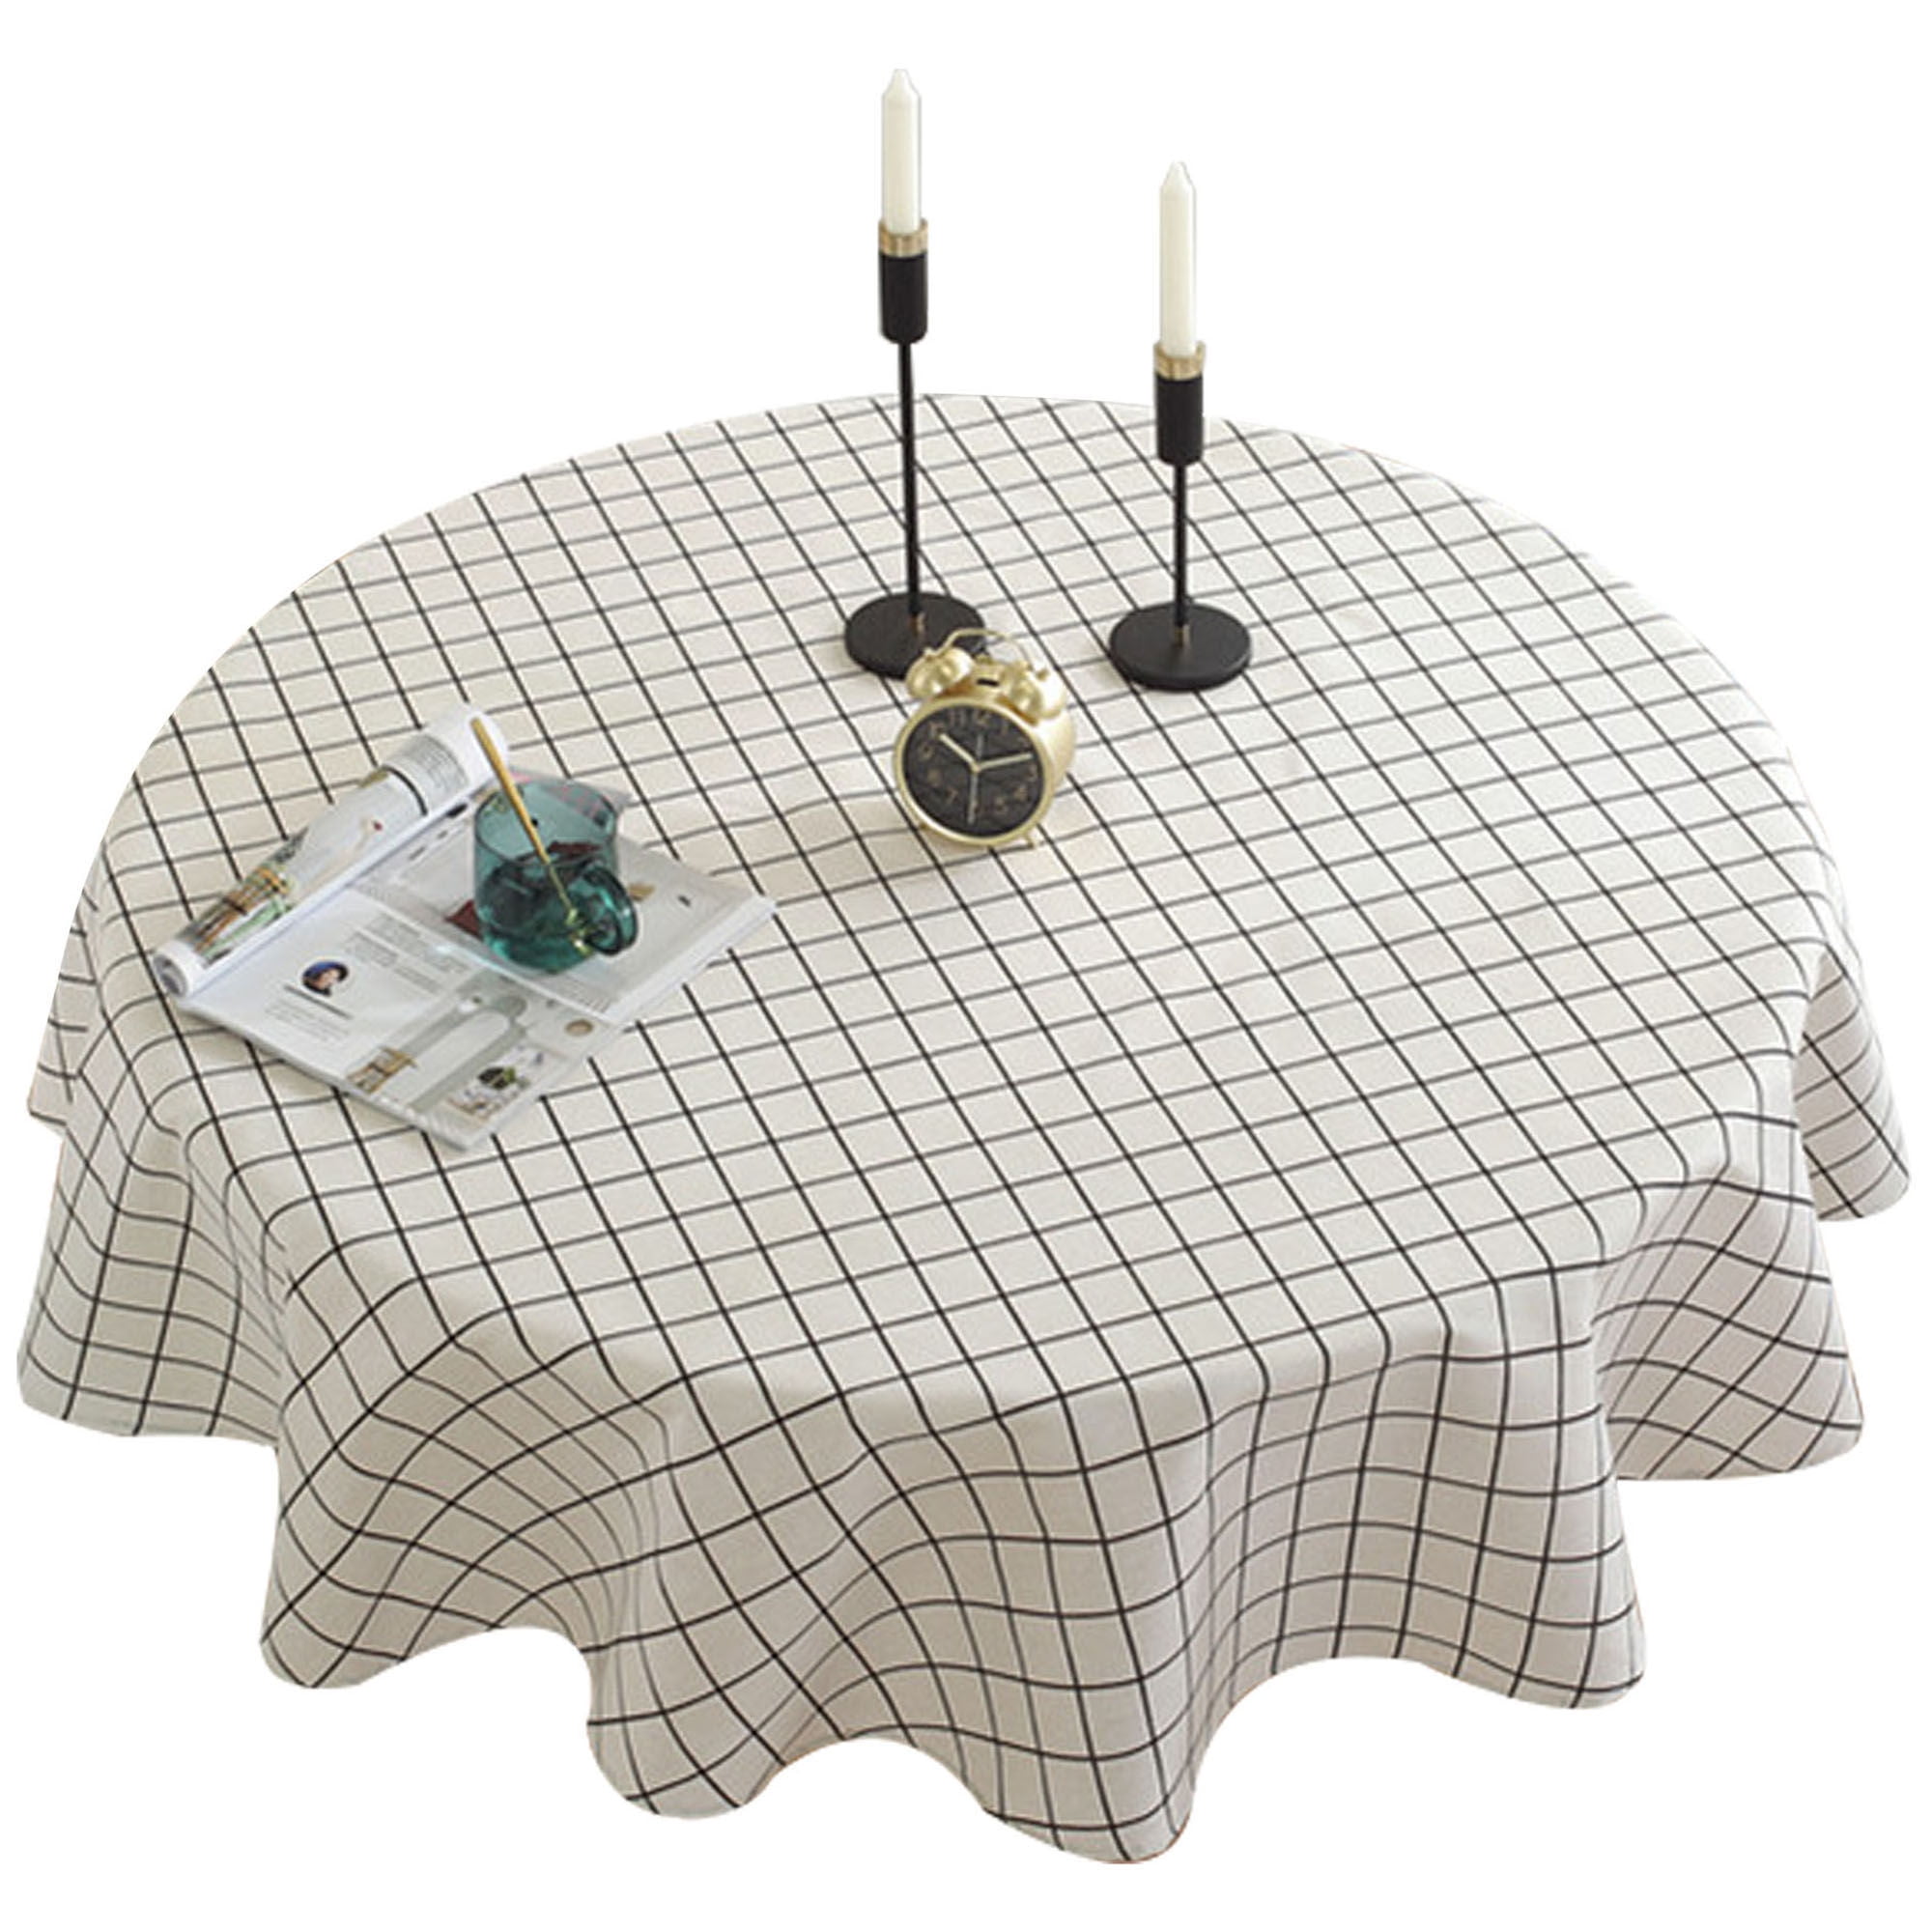 Round Print Cotton Linen Tablecloth,Anti-slip Wrinkle Free Table Cover Room,kitchen,Picnic,Party-I-150cm(60inch) - Walmart.com